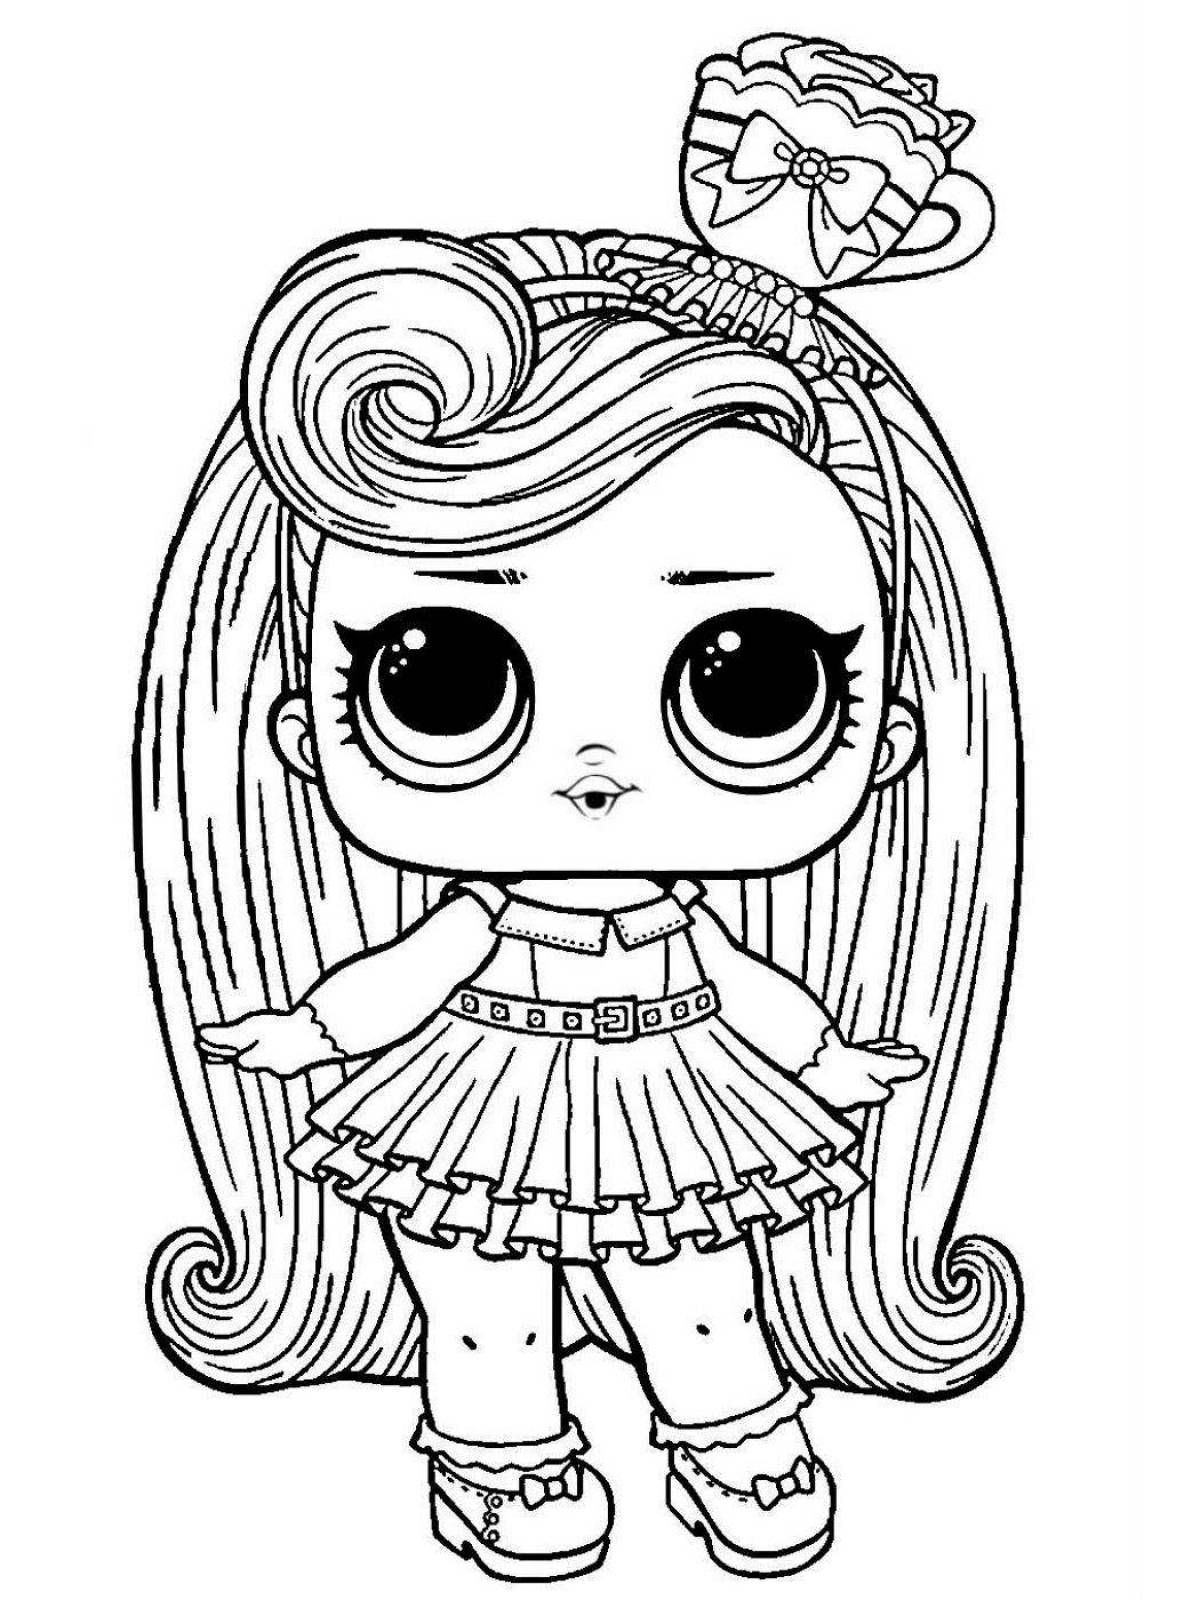 Lol print dolls wonderful coloring pages